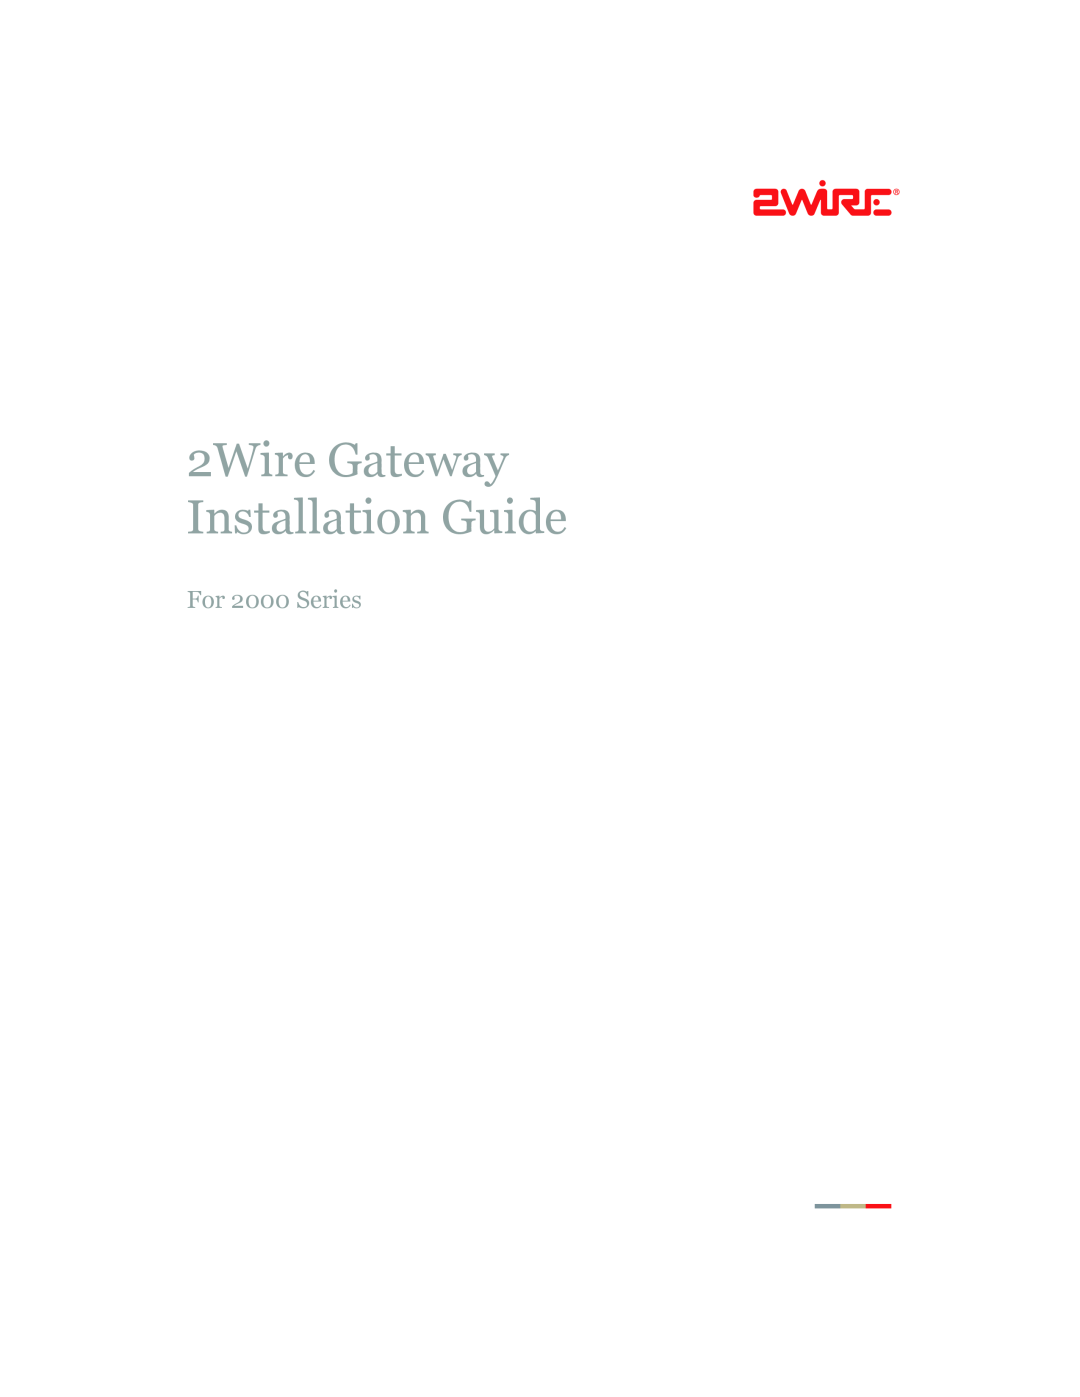 2Wire 2700HG-D, 2701HG-T, 2700HGB, 2701HG-B, 2701HG-S manual 2Wire Gateway Installation Guide, For 2000 Series 